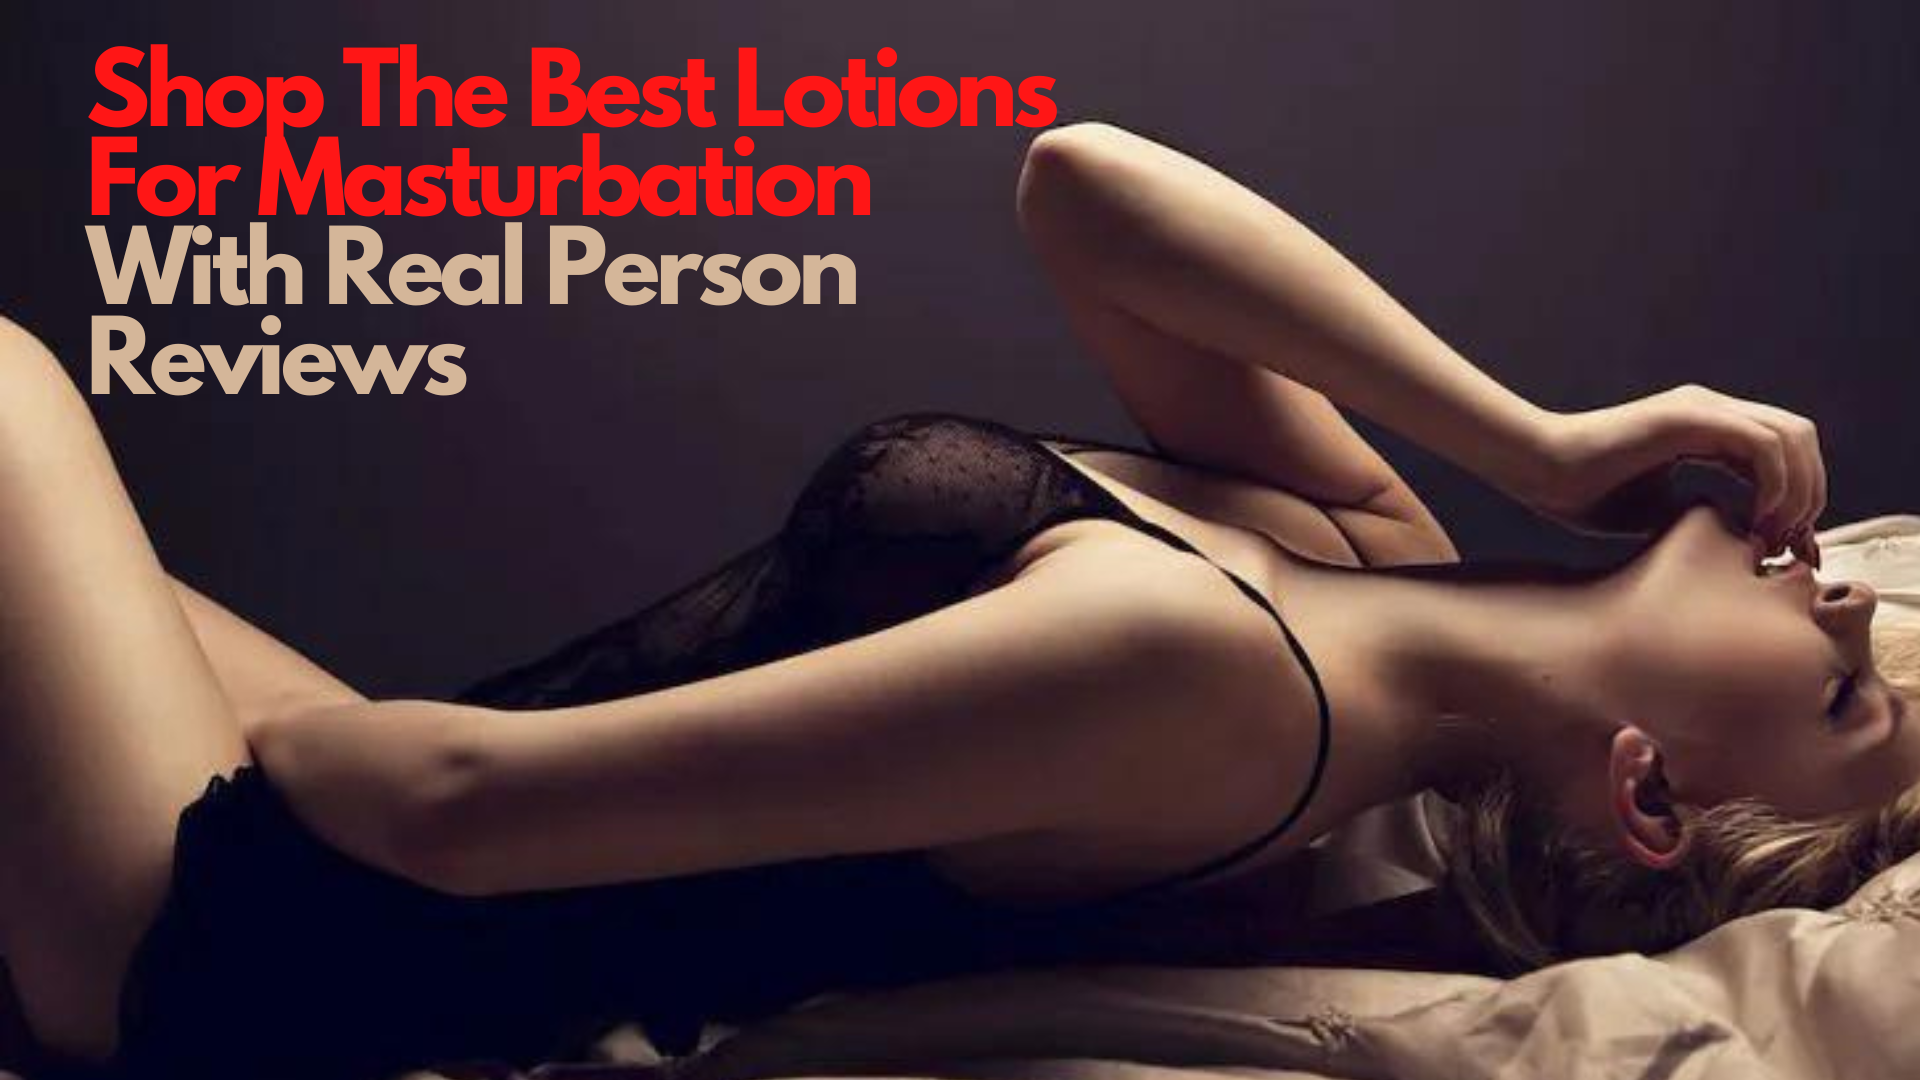 Shop The Best Lotions For Masturbation With Real Person Reviews